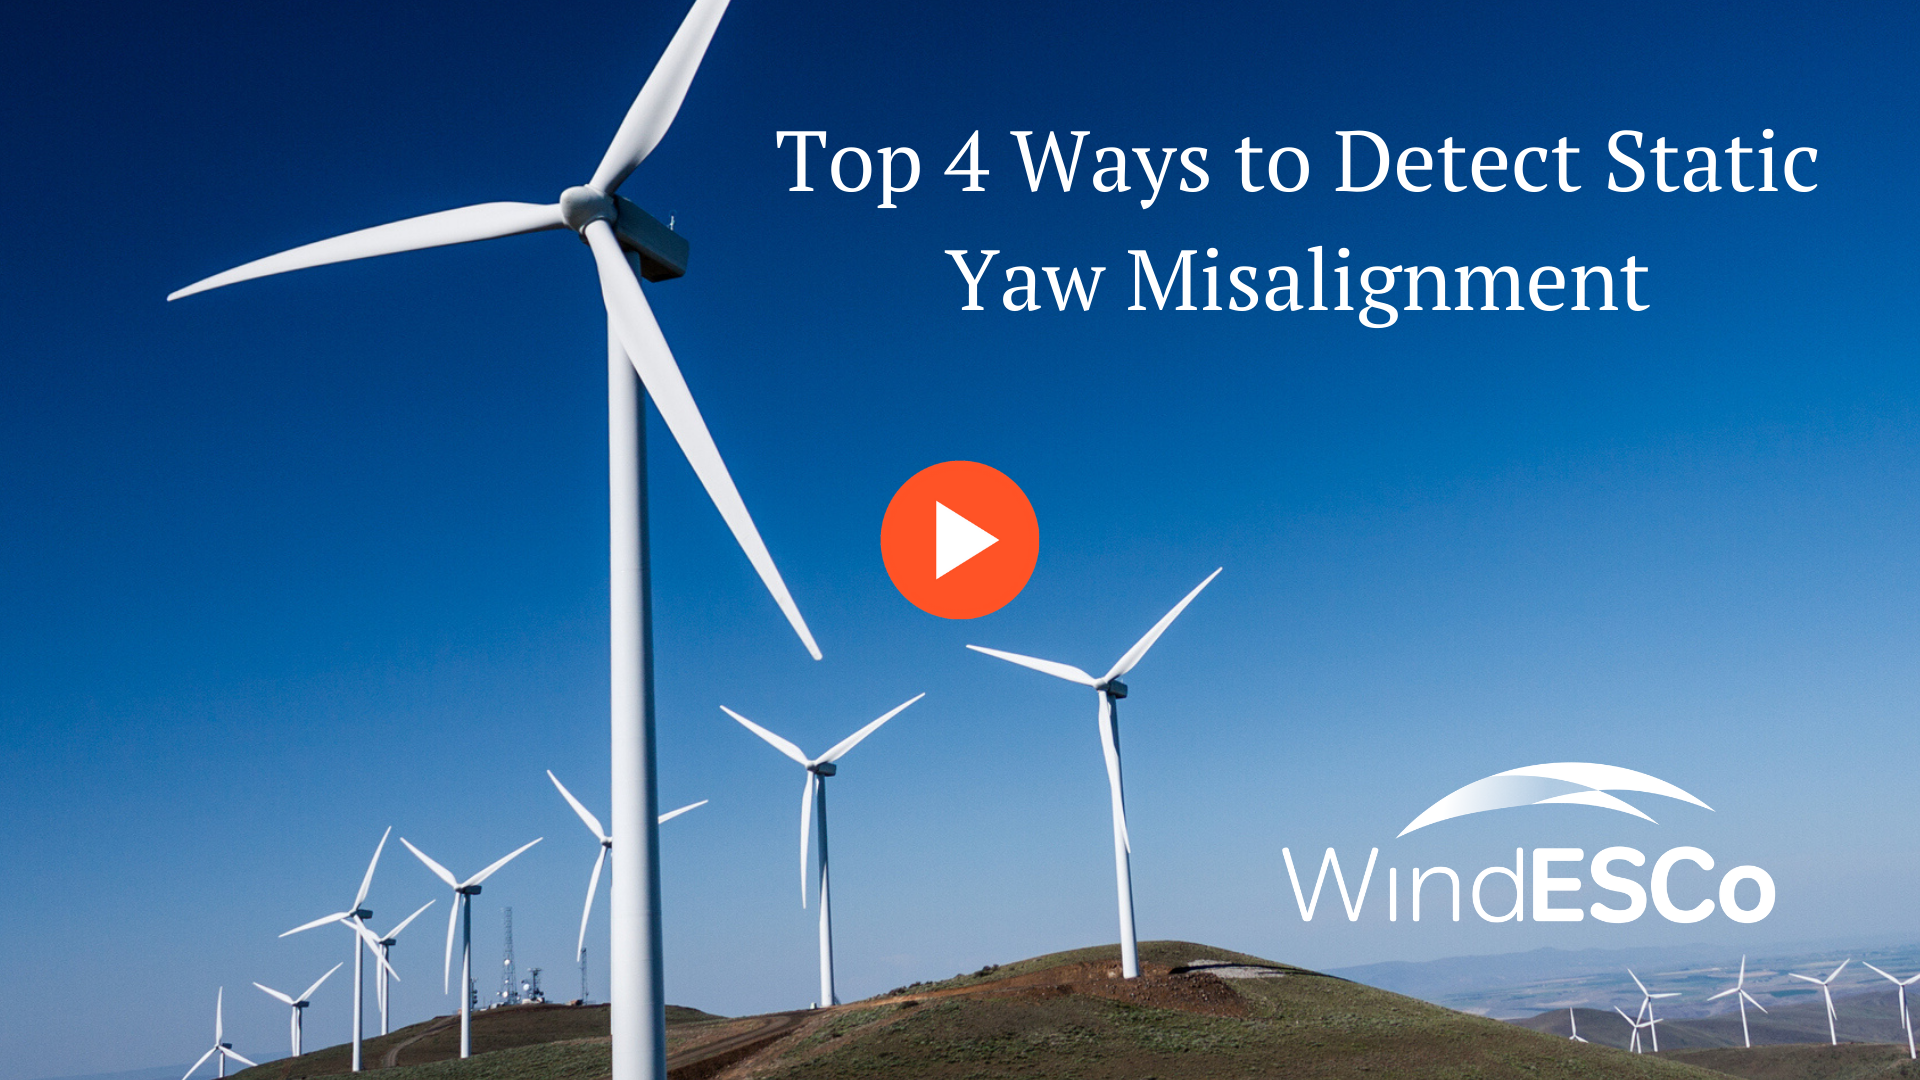 Top 4 Ways to Detect Static Yaw Misalignment